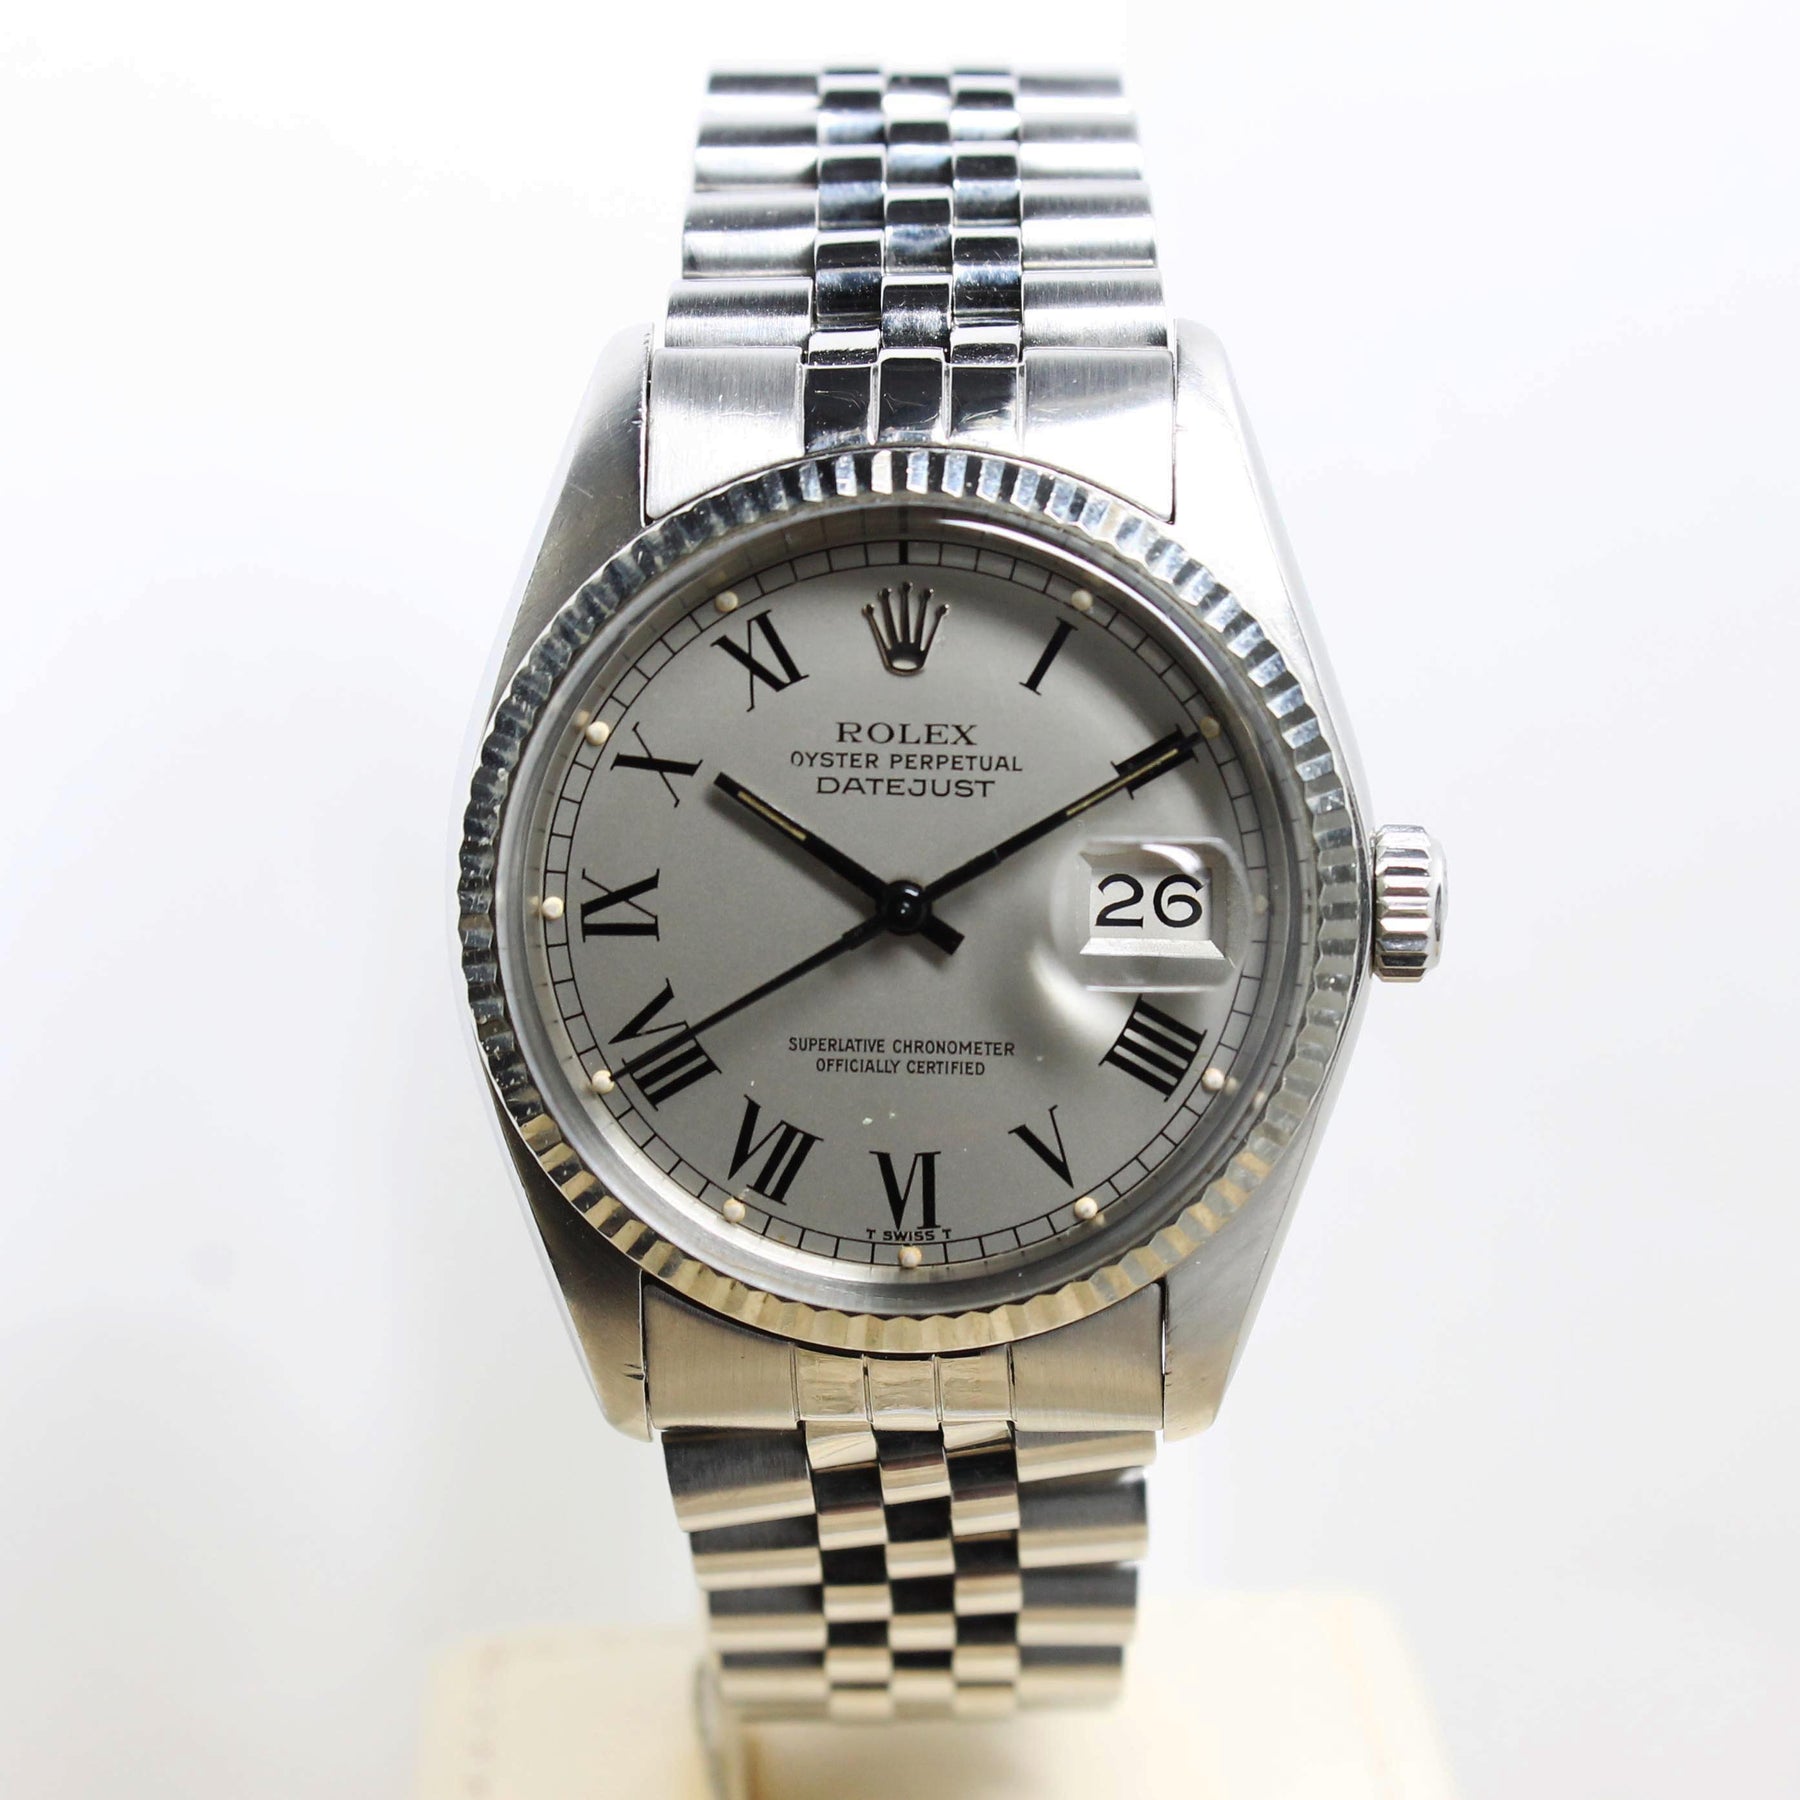 Rolex Oyster Perpetual Datejust St/WG Ref. 16014 Year 1978 (with Certificate)